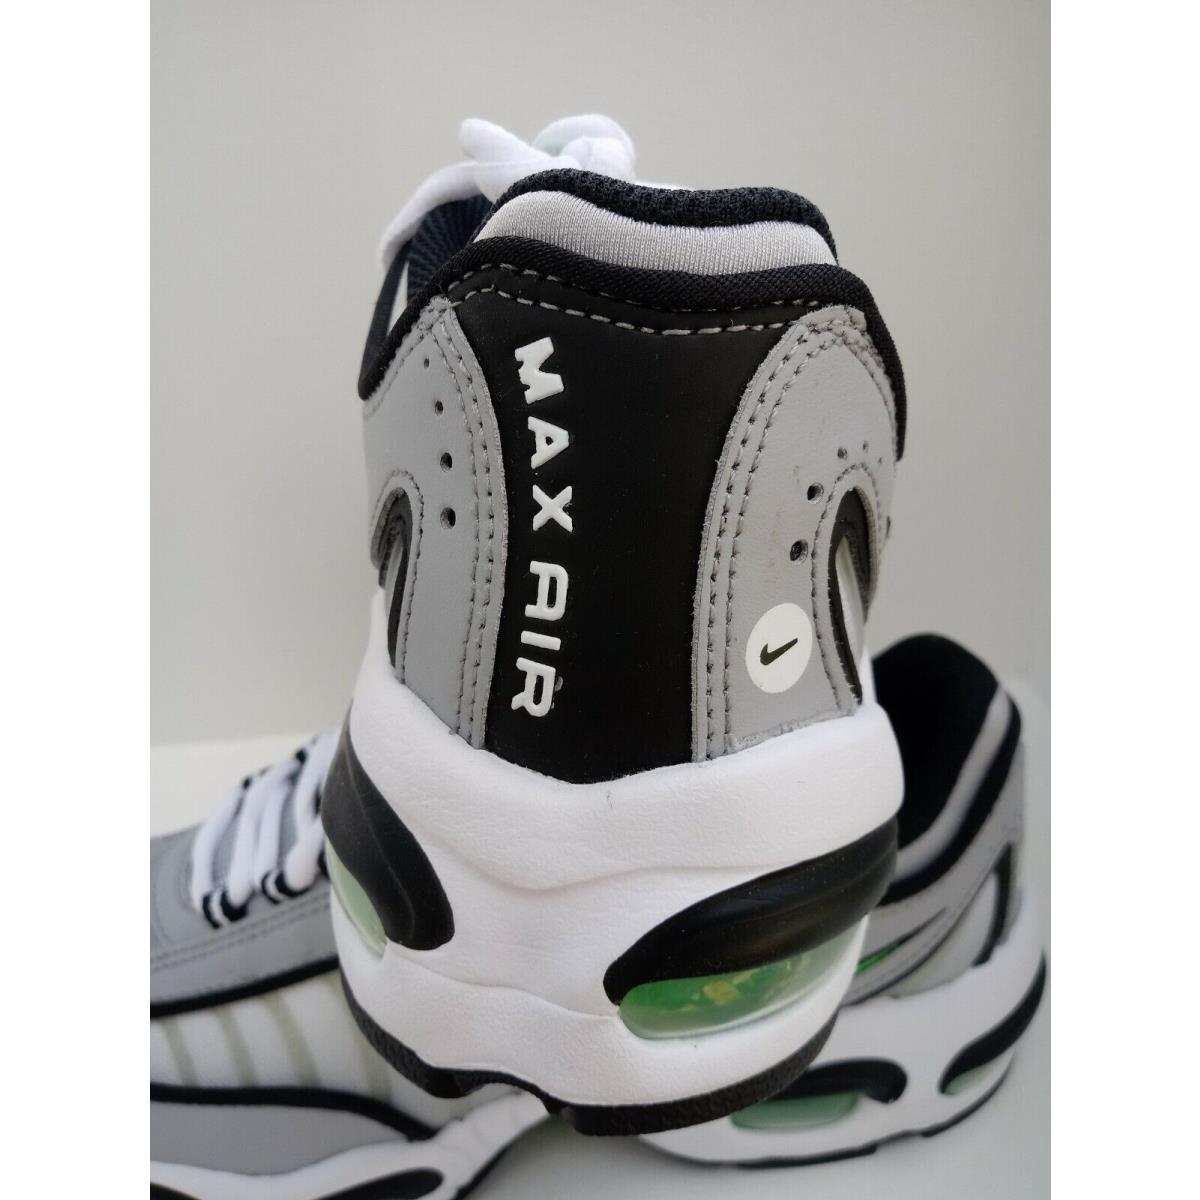 Nike shoes  - Wolf Grey/Black-Green Spark-White 10